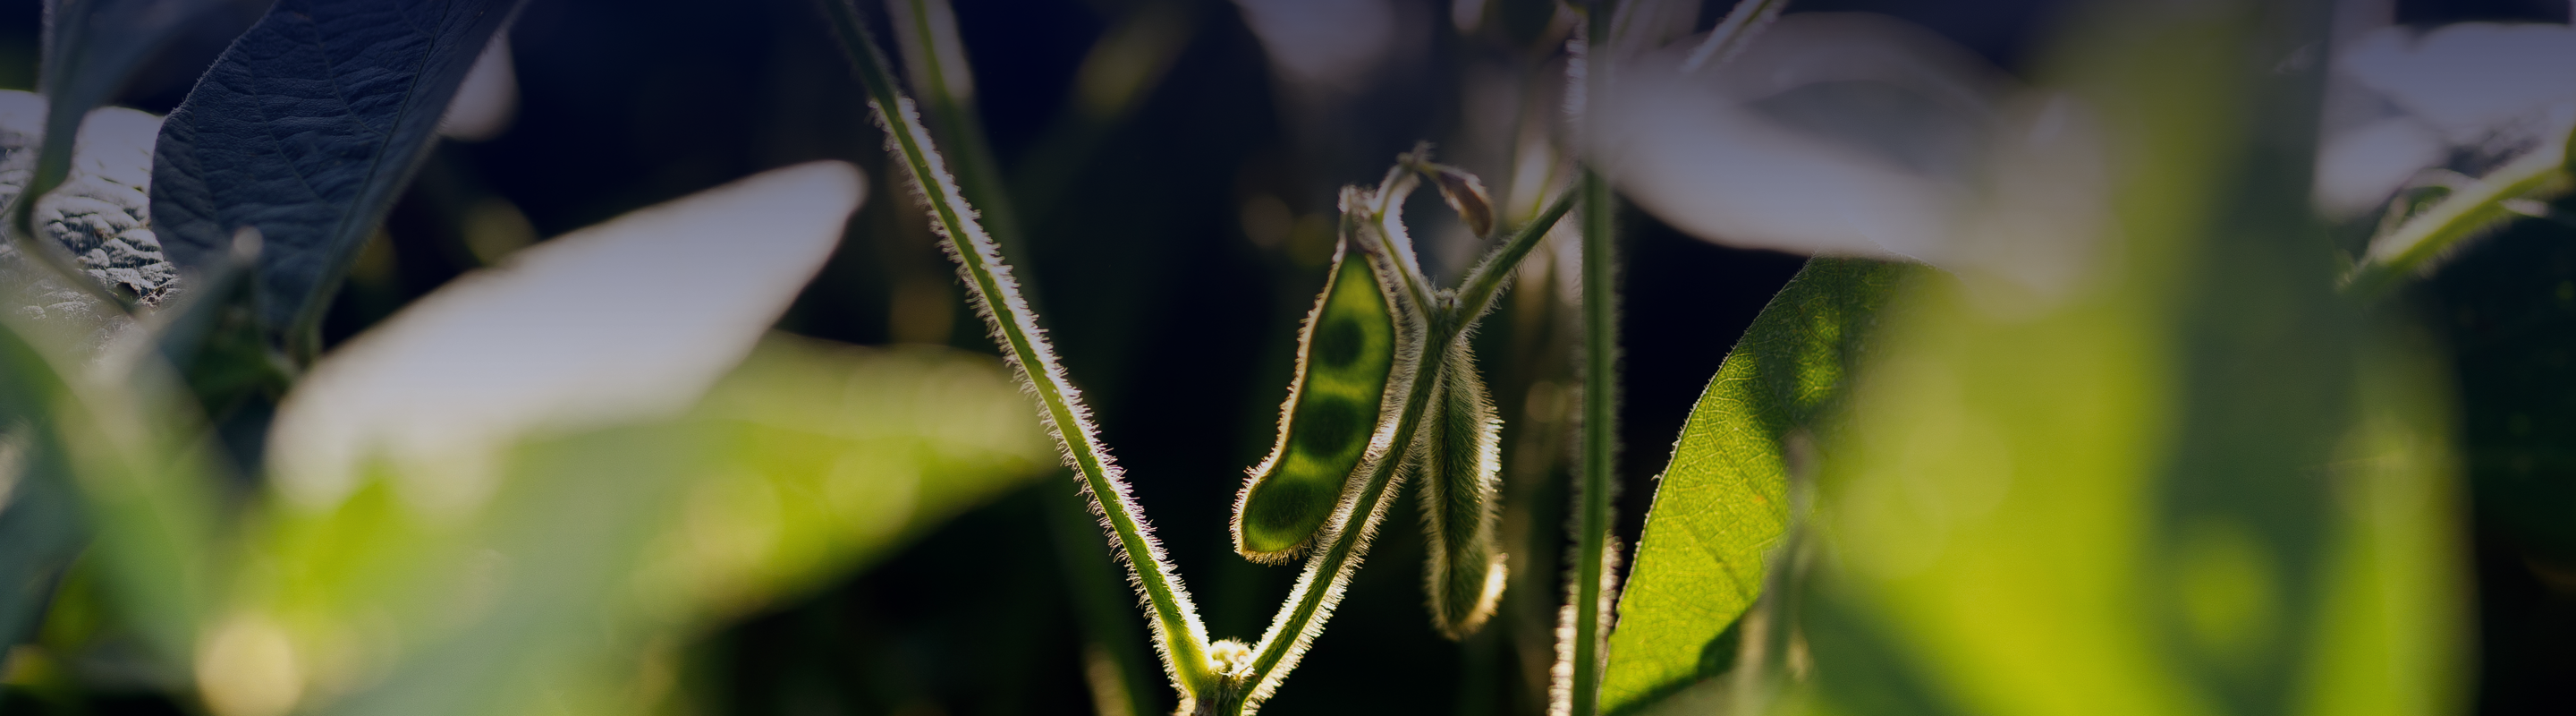 Close up of a soy bean plant and bean pod